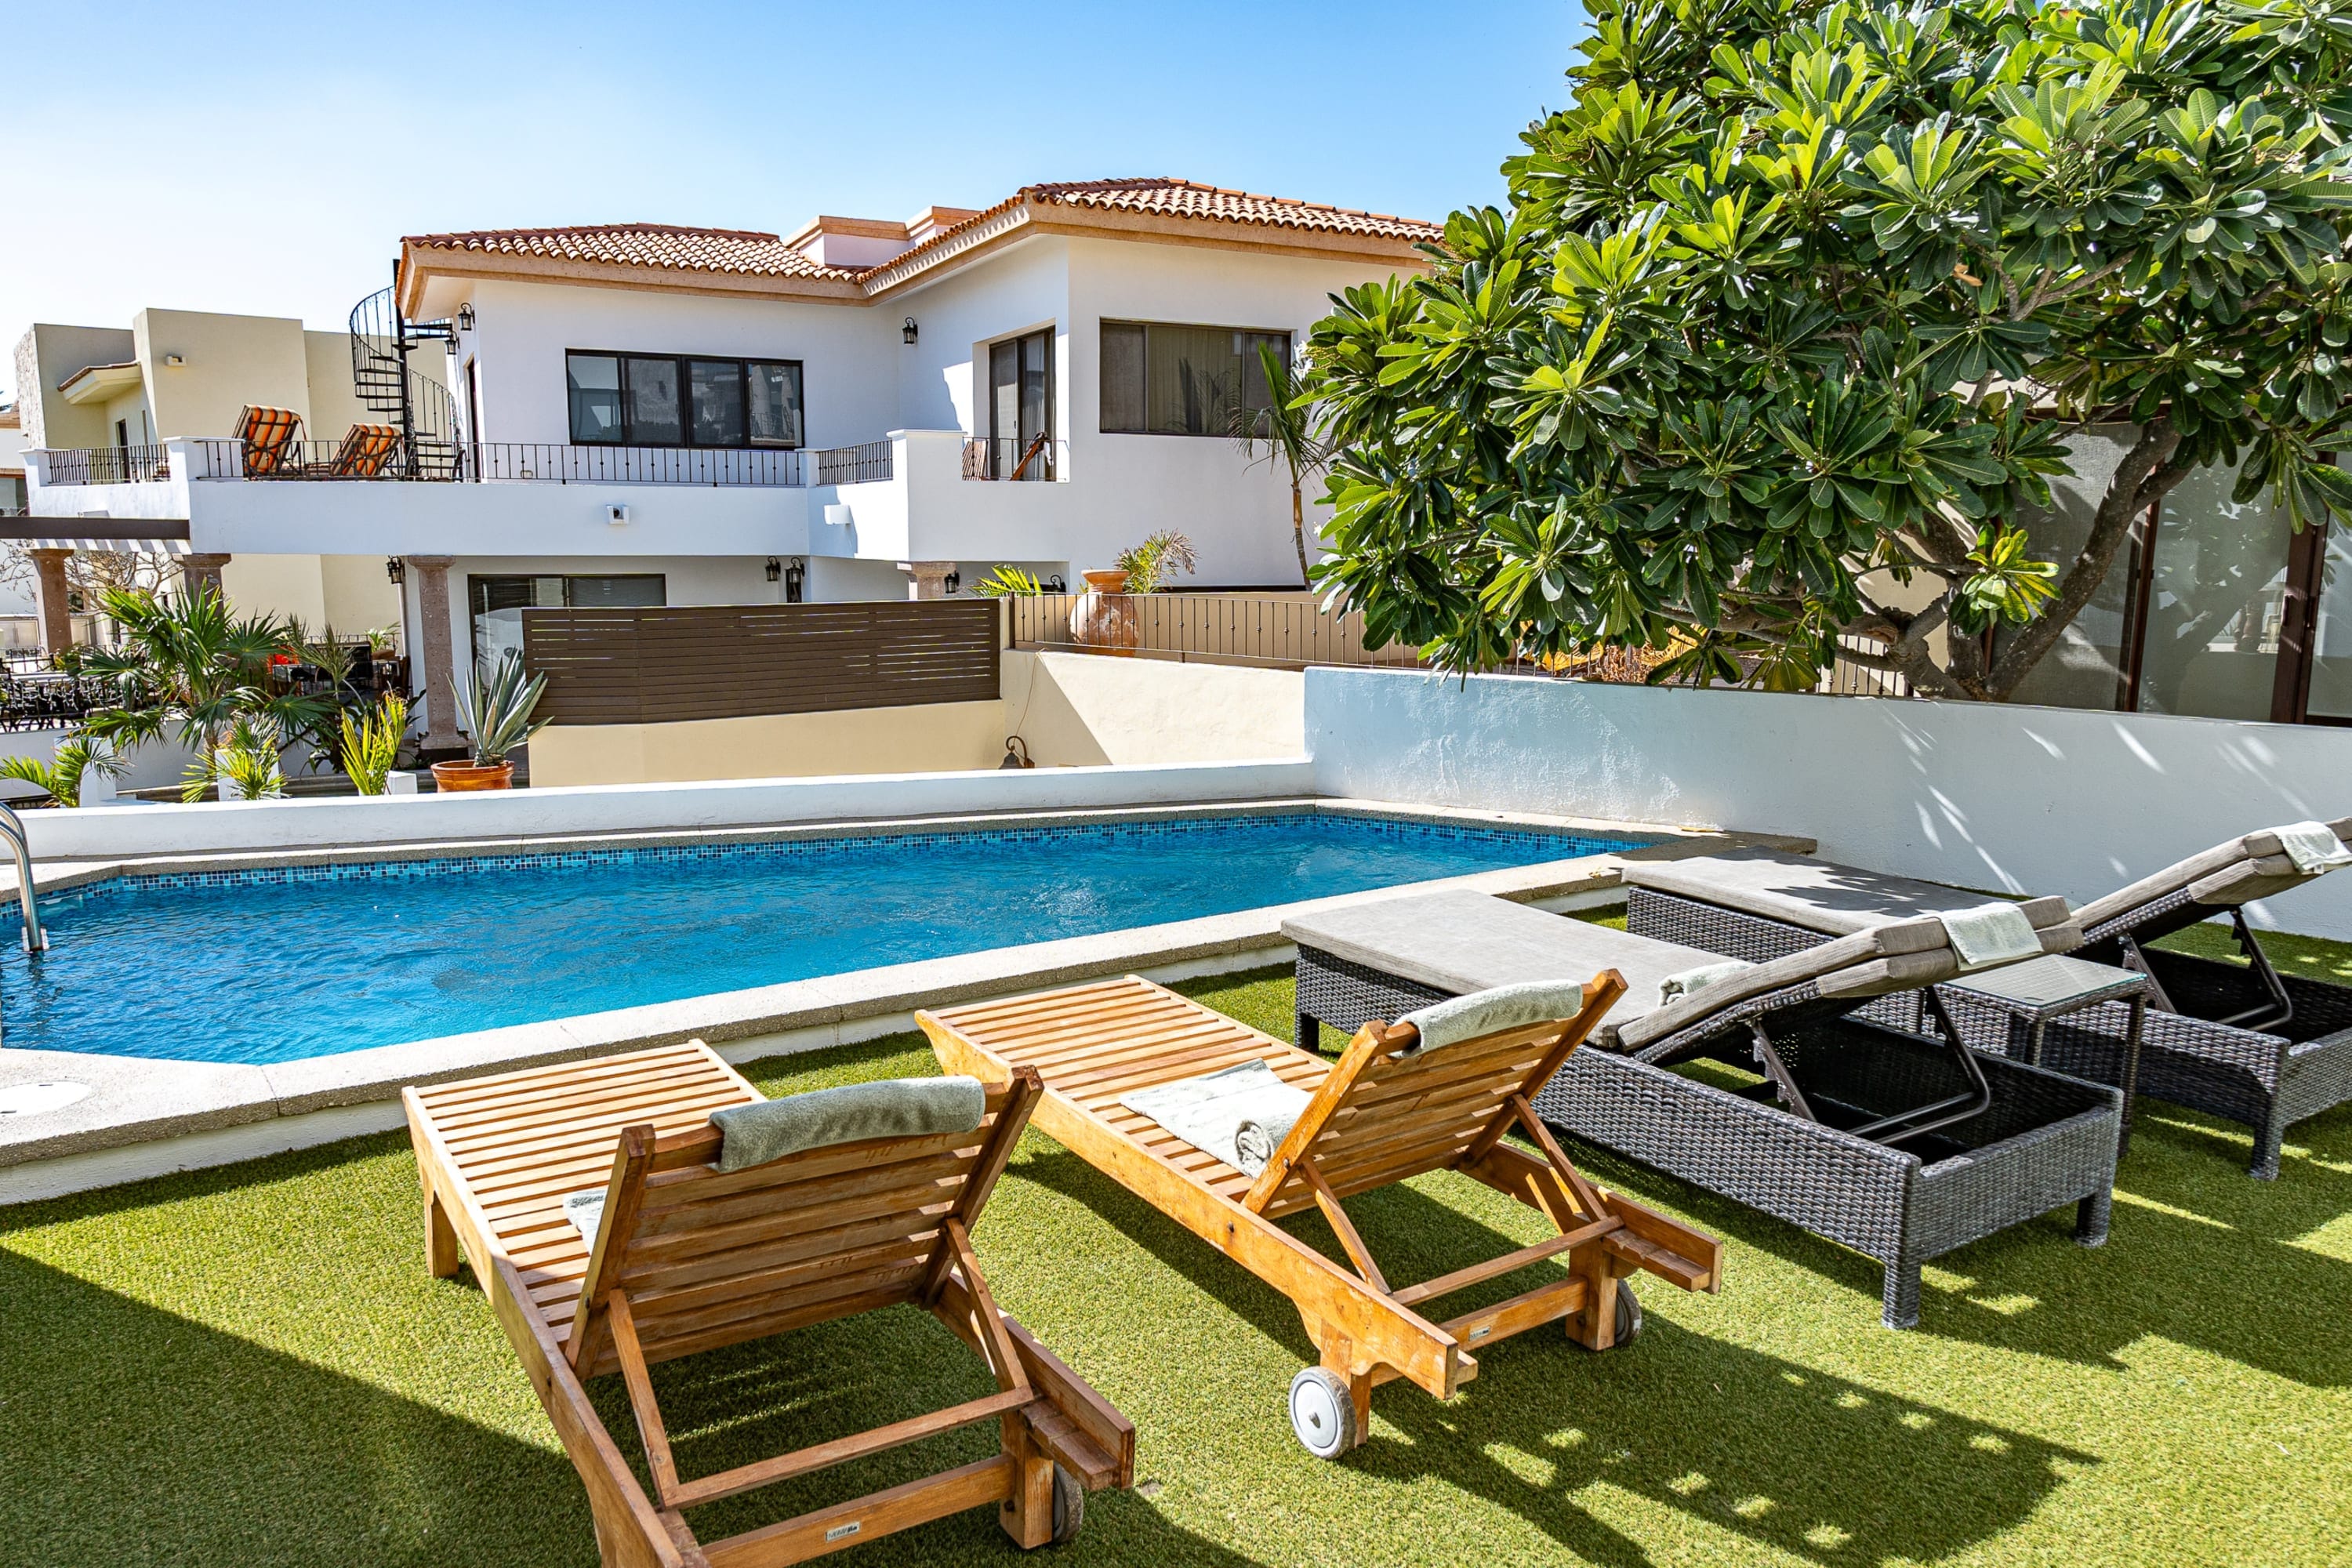 Property Image 1 - Villa Bliss 7BR with Private Pool in Puerta del Mar